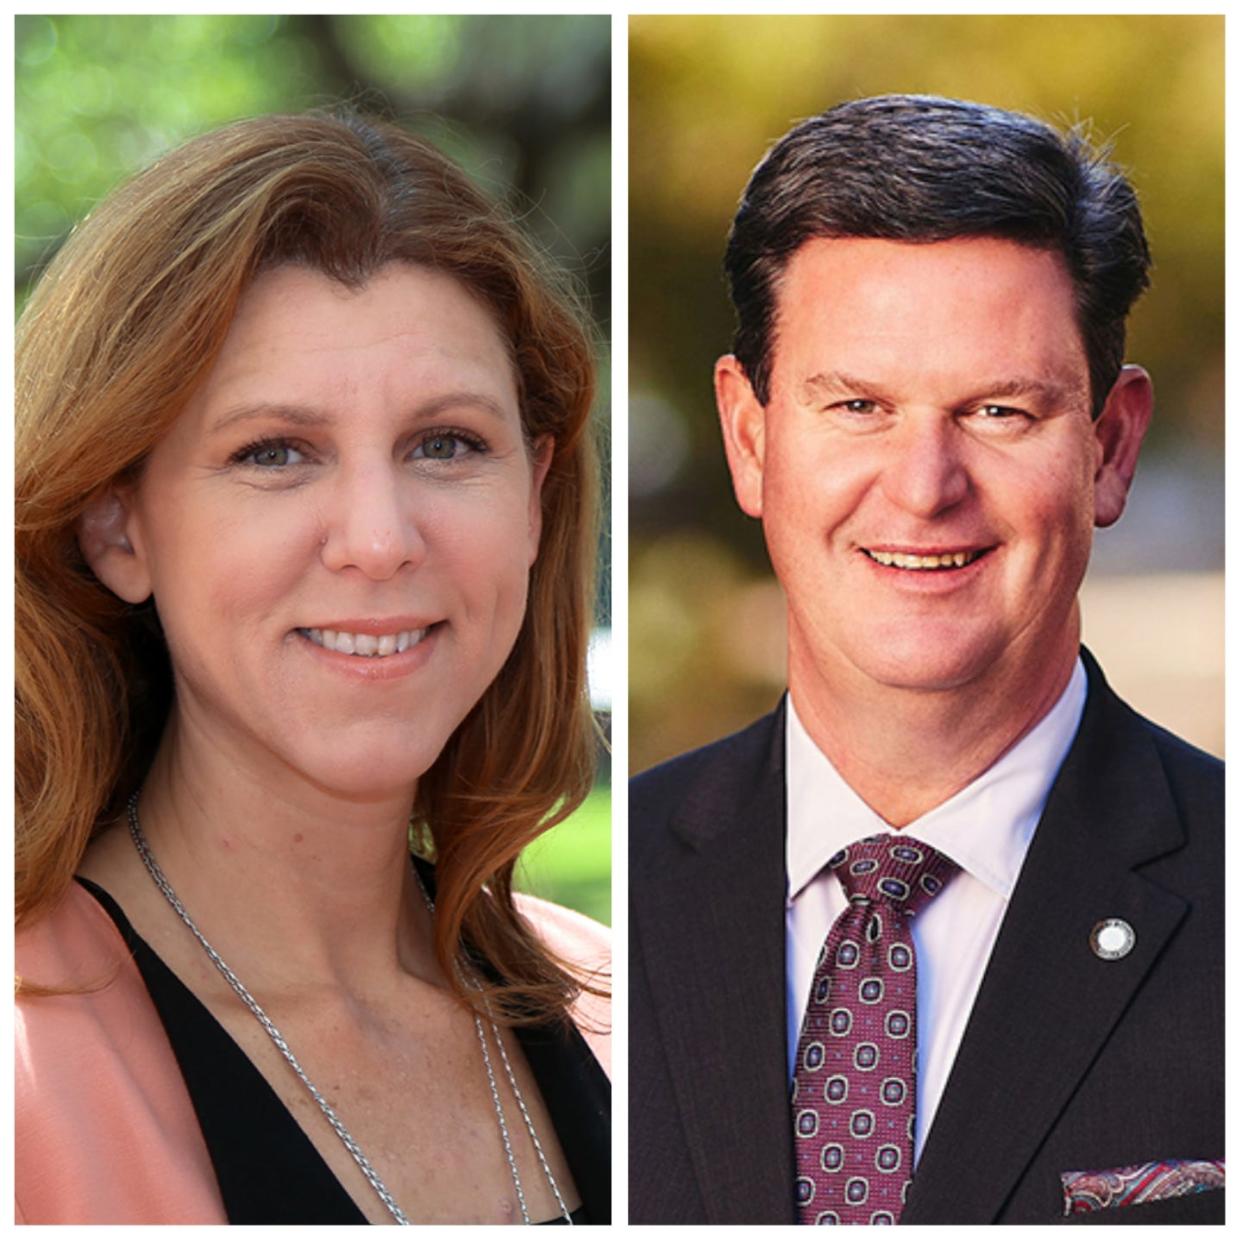 Mayor John Dailey will face Leon County Commissioner Kristin Dozier in a run-off election in November.